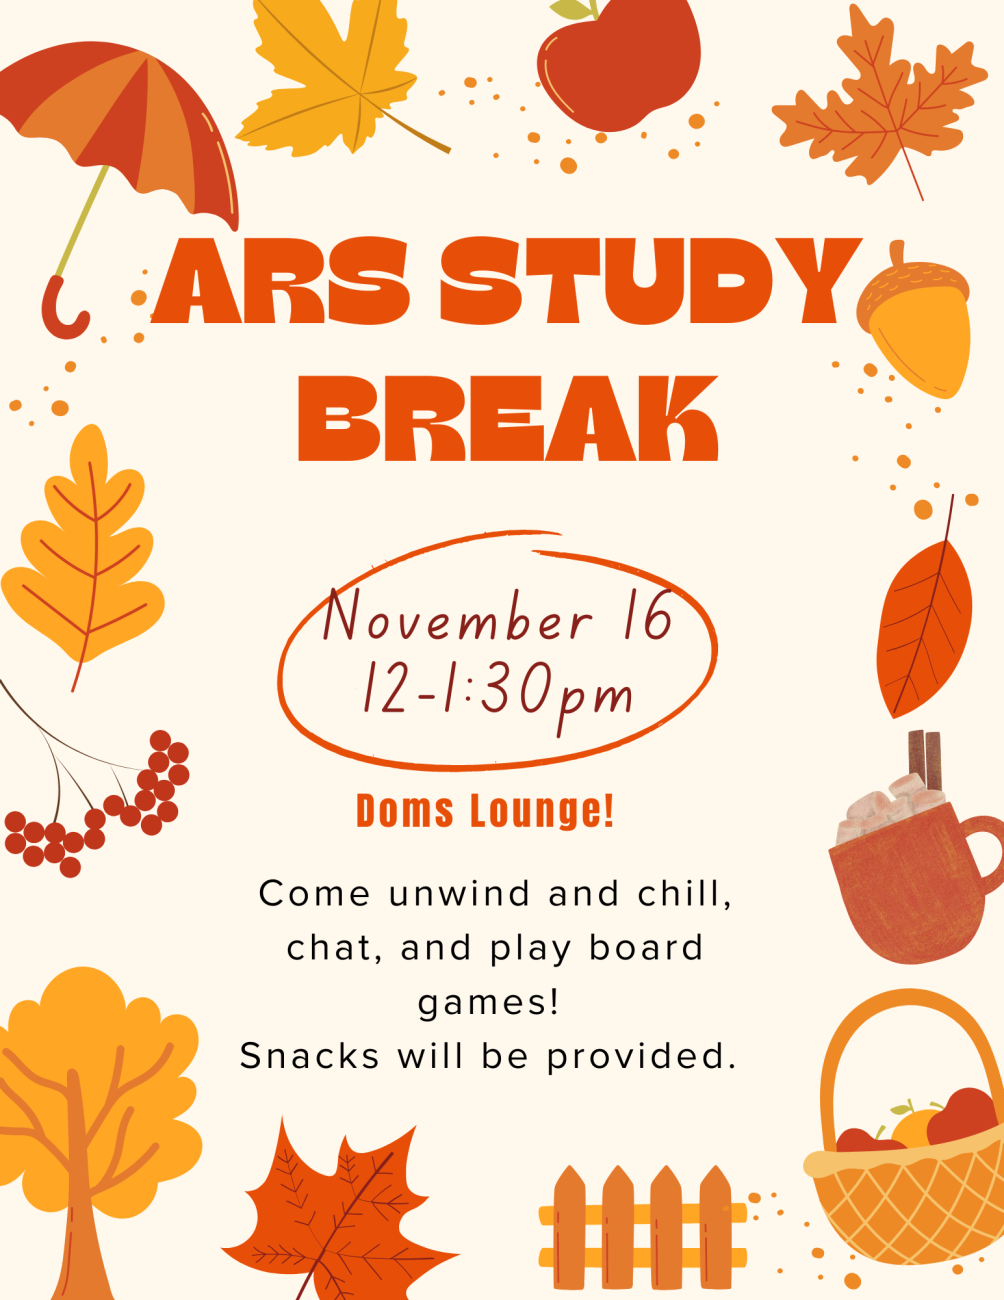 Flyer for the ARS study break with info and images of leaves and fall-related objects.